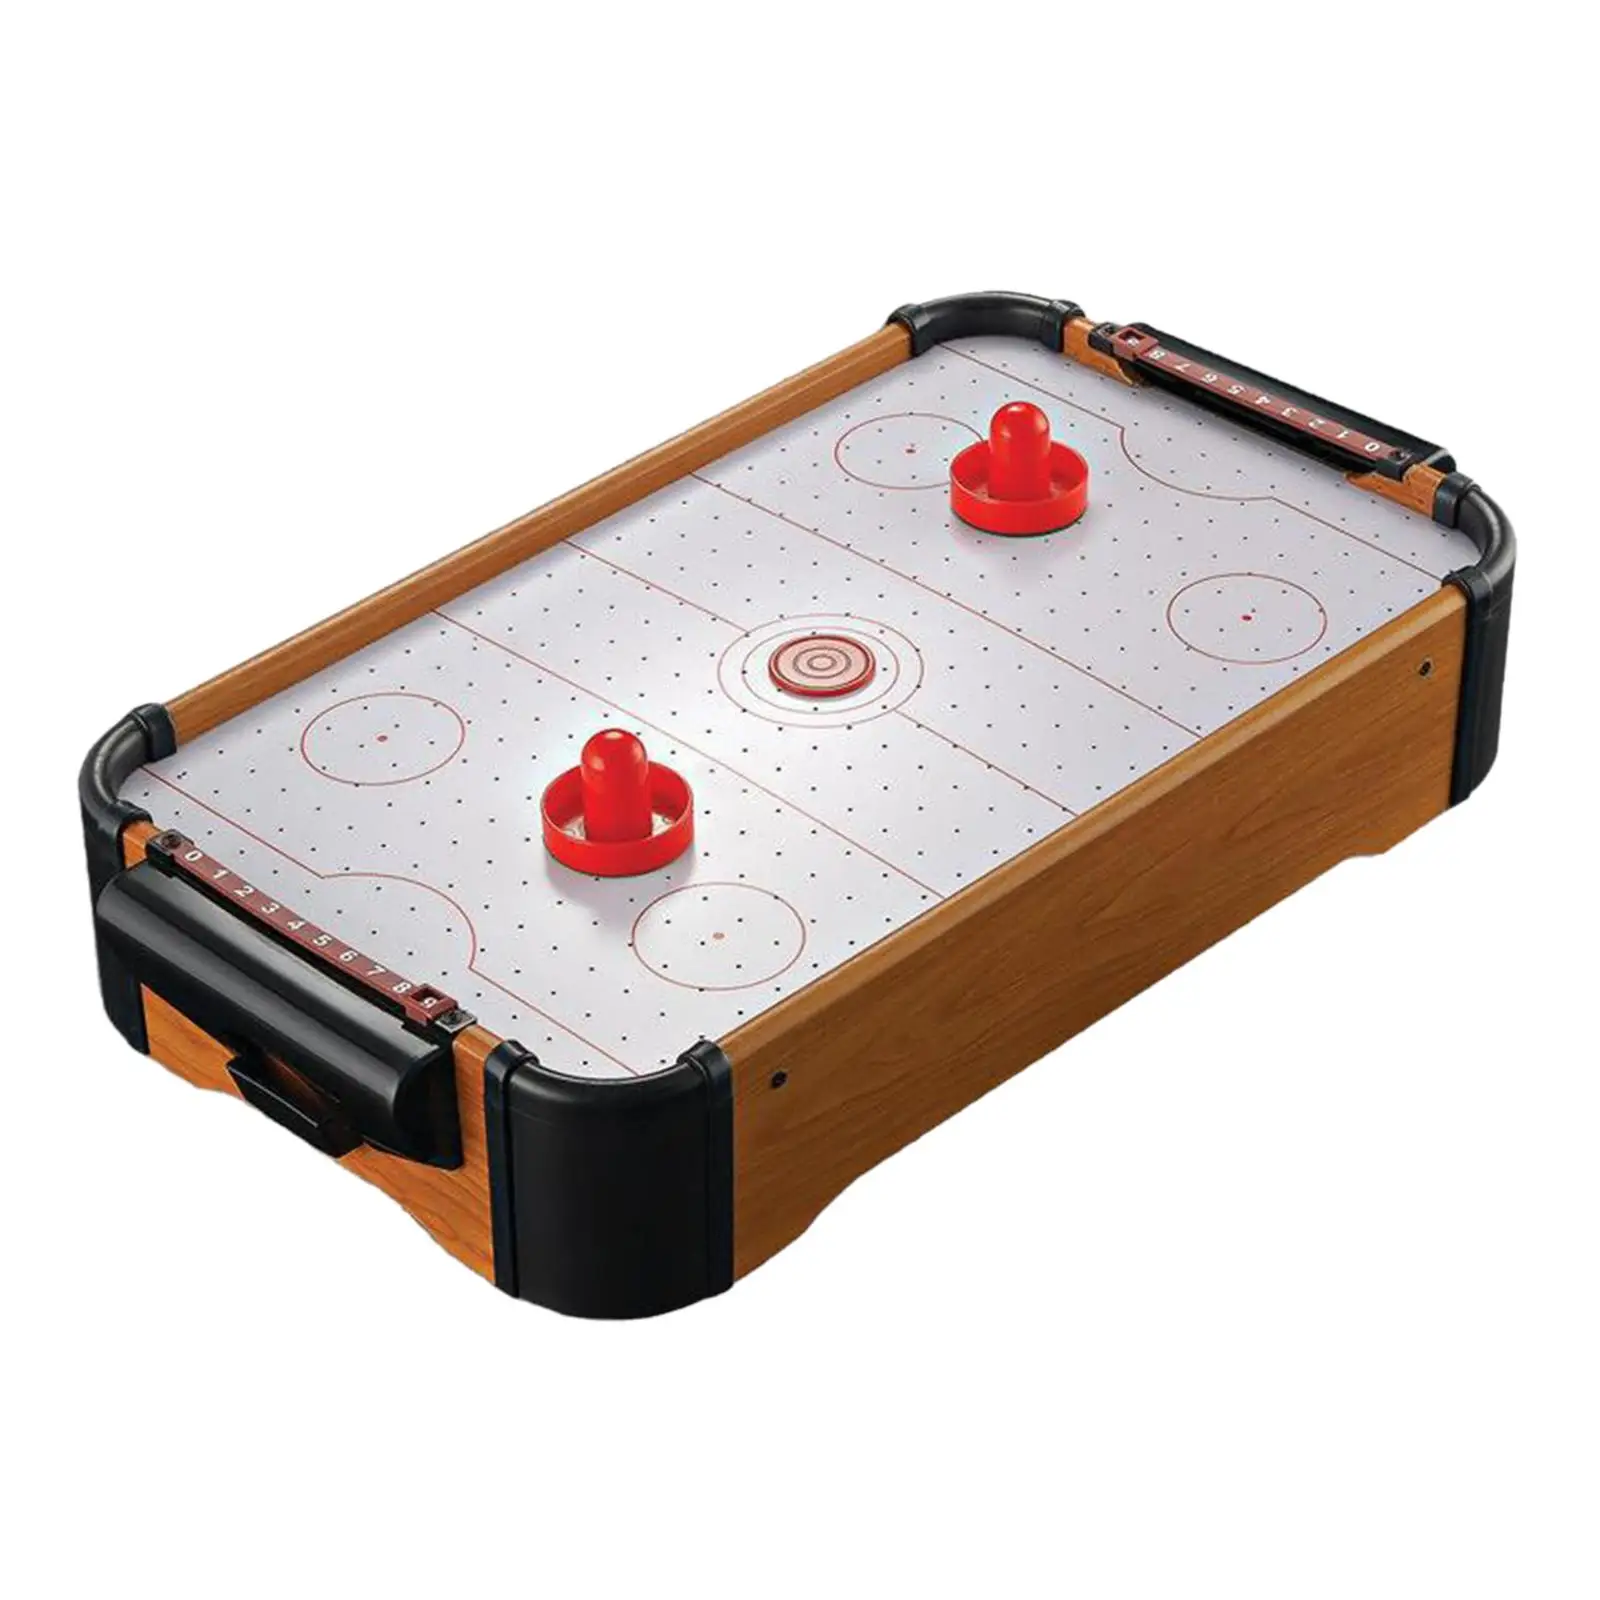 Portable Hockey Game Set Entertainment Gathering Parent Child Party Table top Hockey for Adults